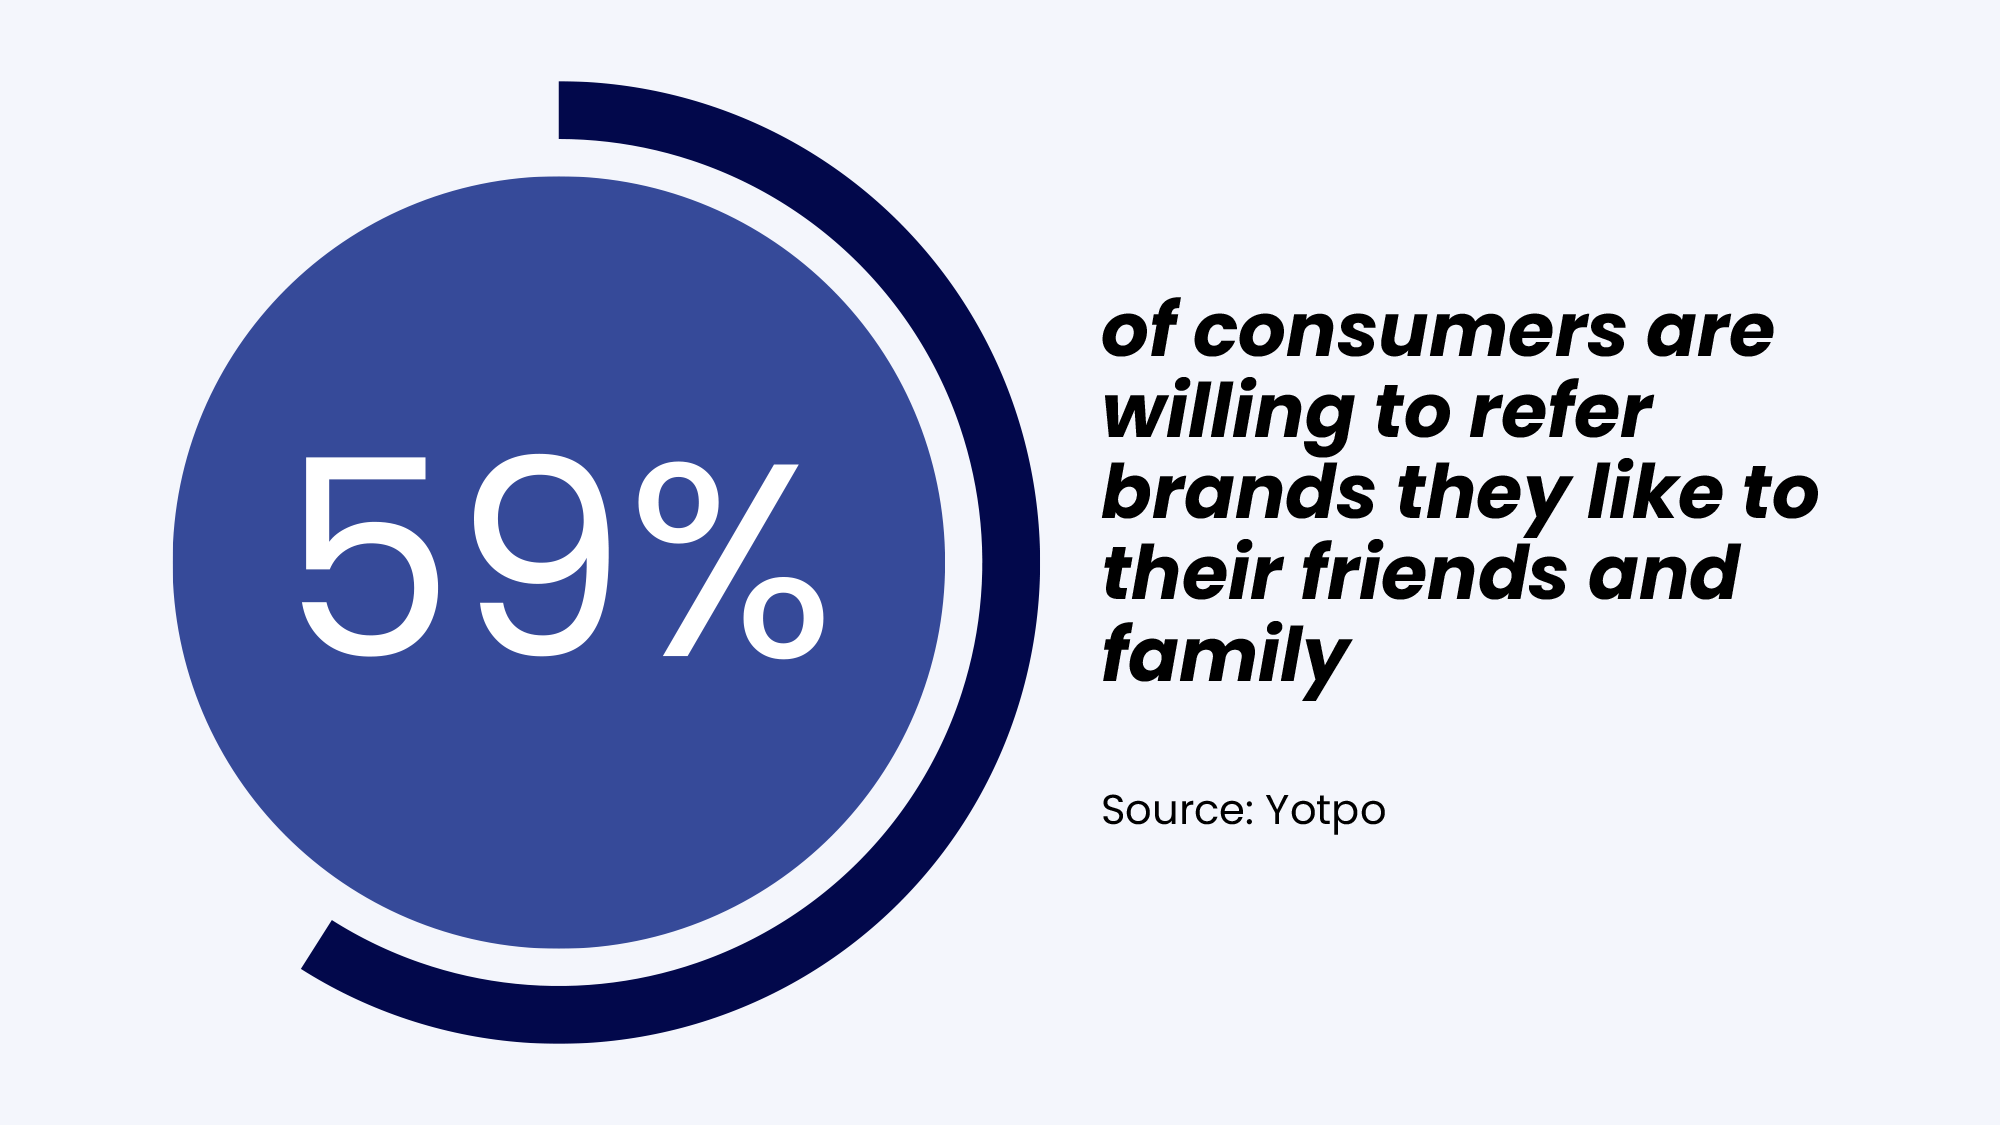 59% of consumers are willing to refer brands they like to their friends and family